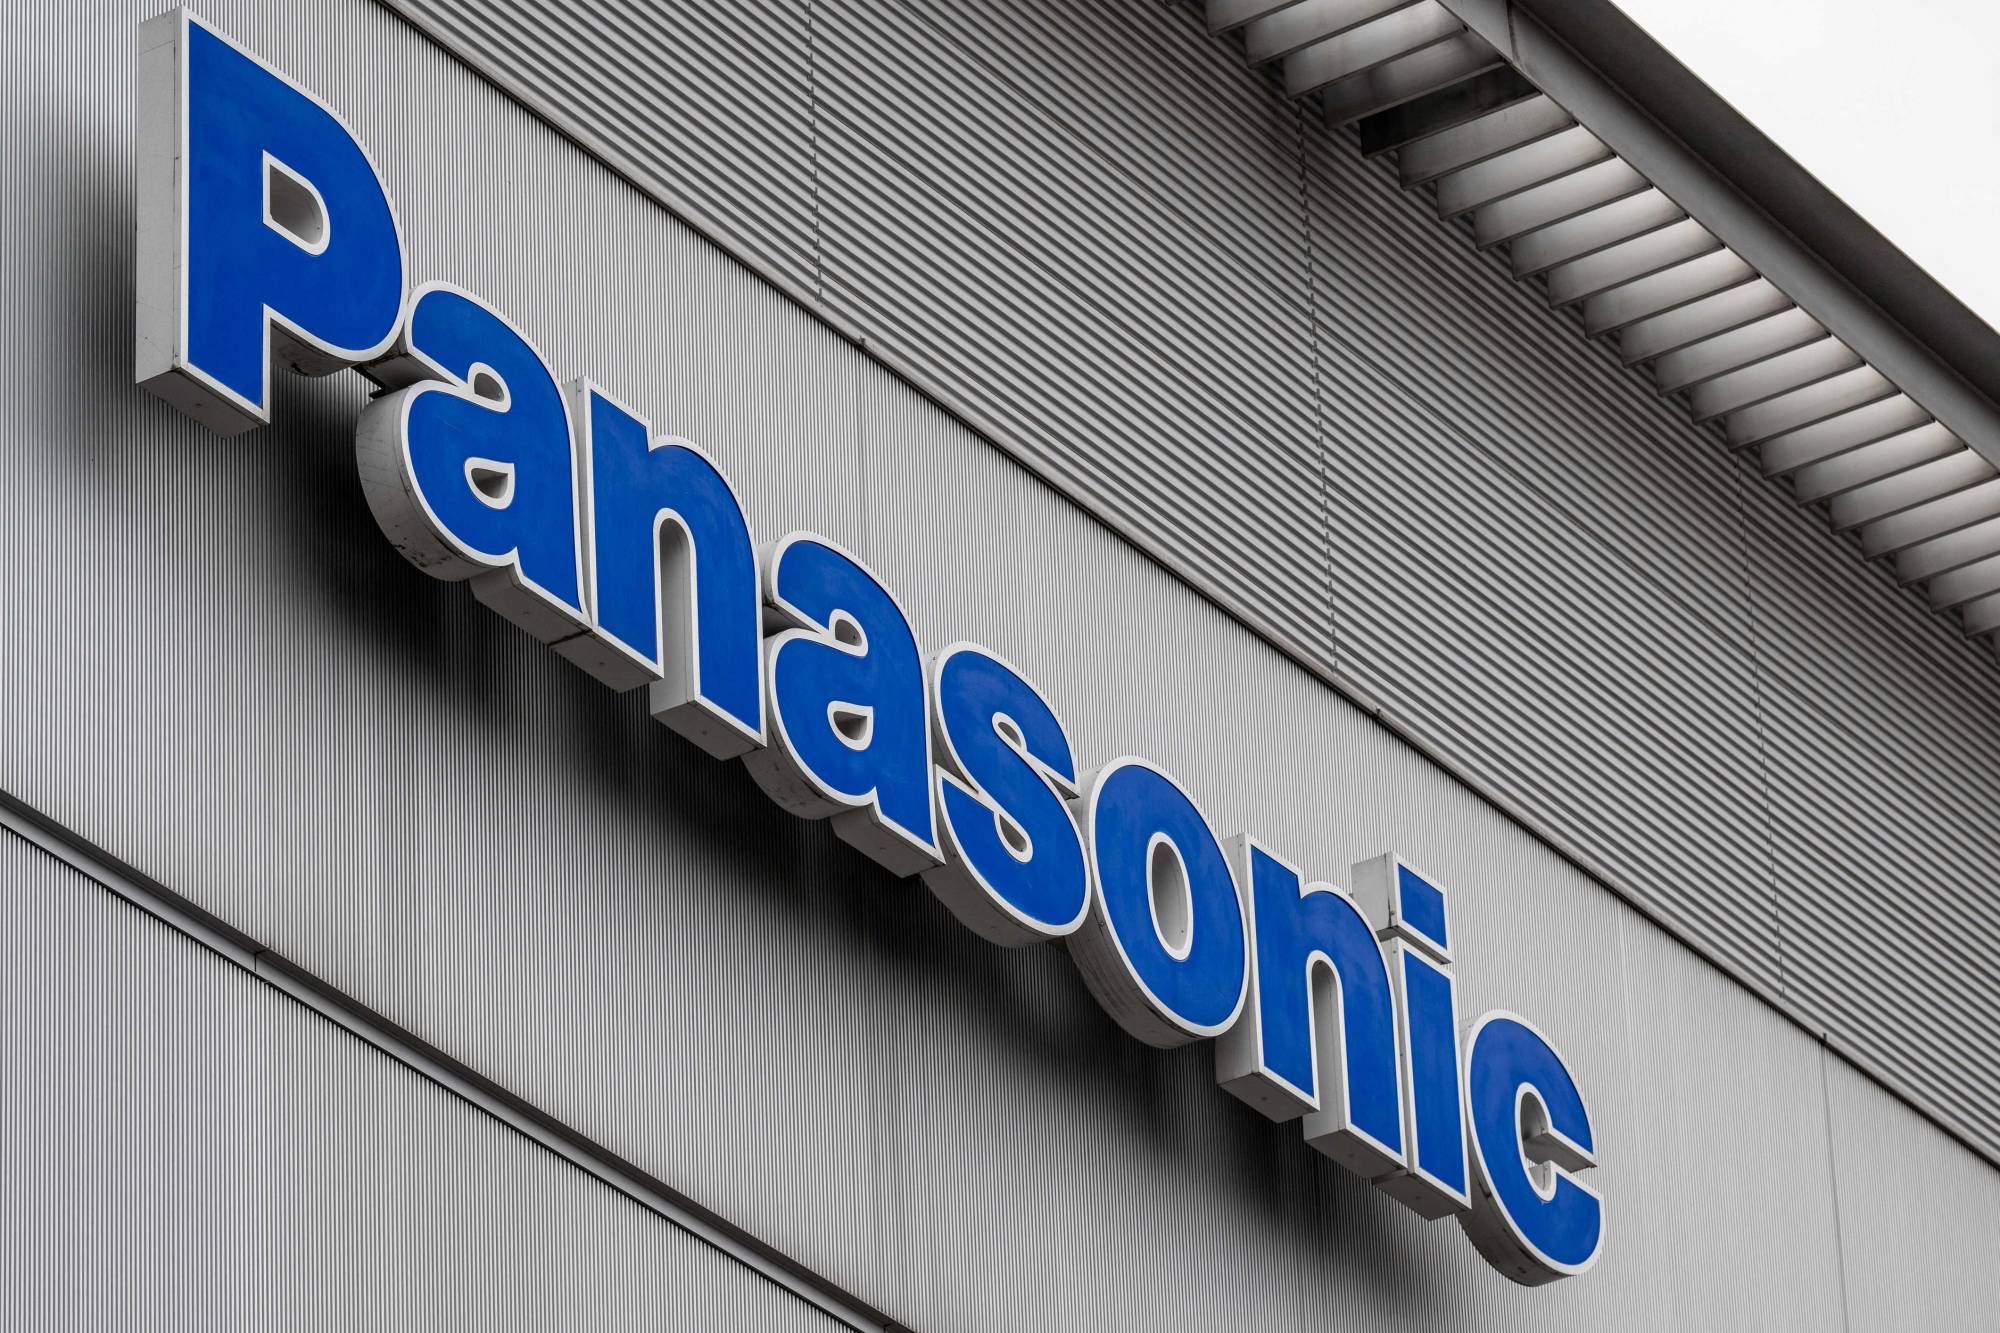 Panasonic cuts full-year outlook as costly raw materials weigh